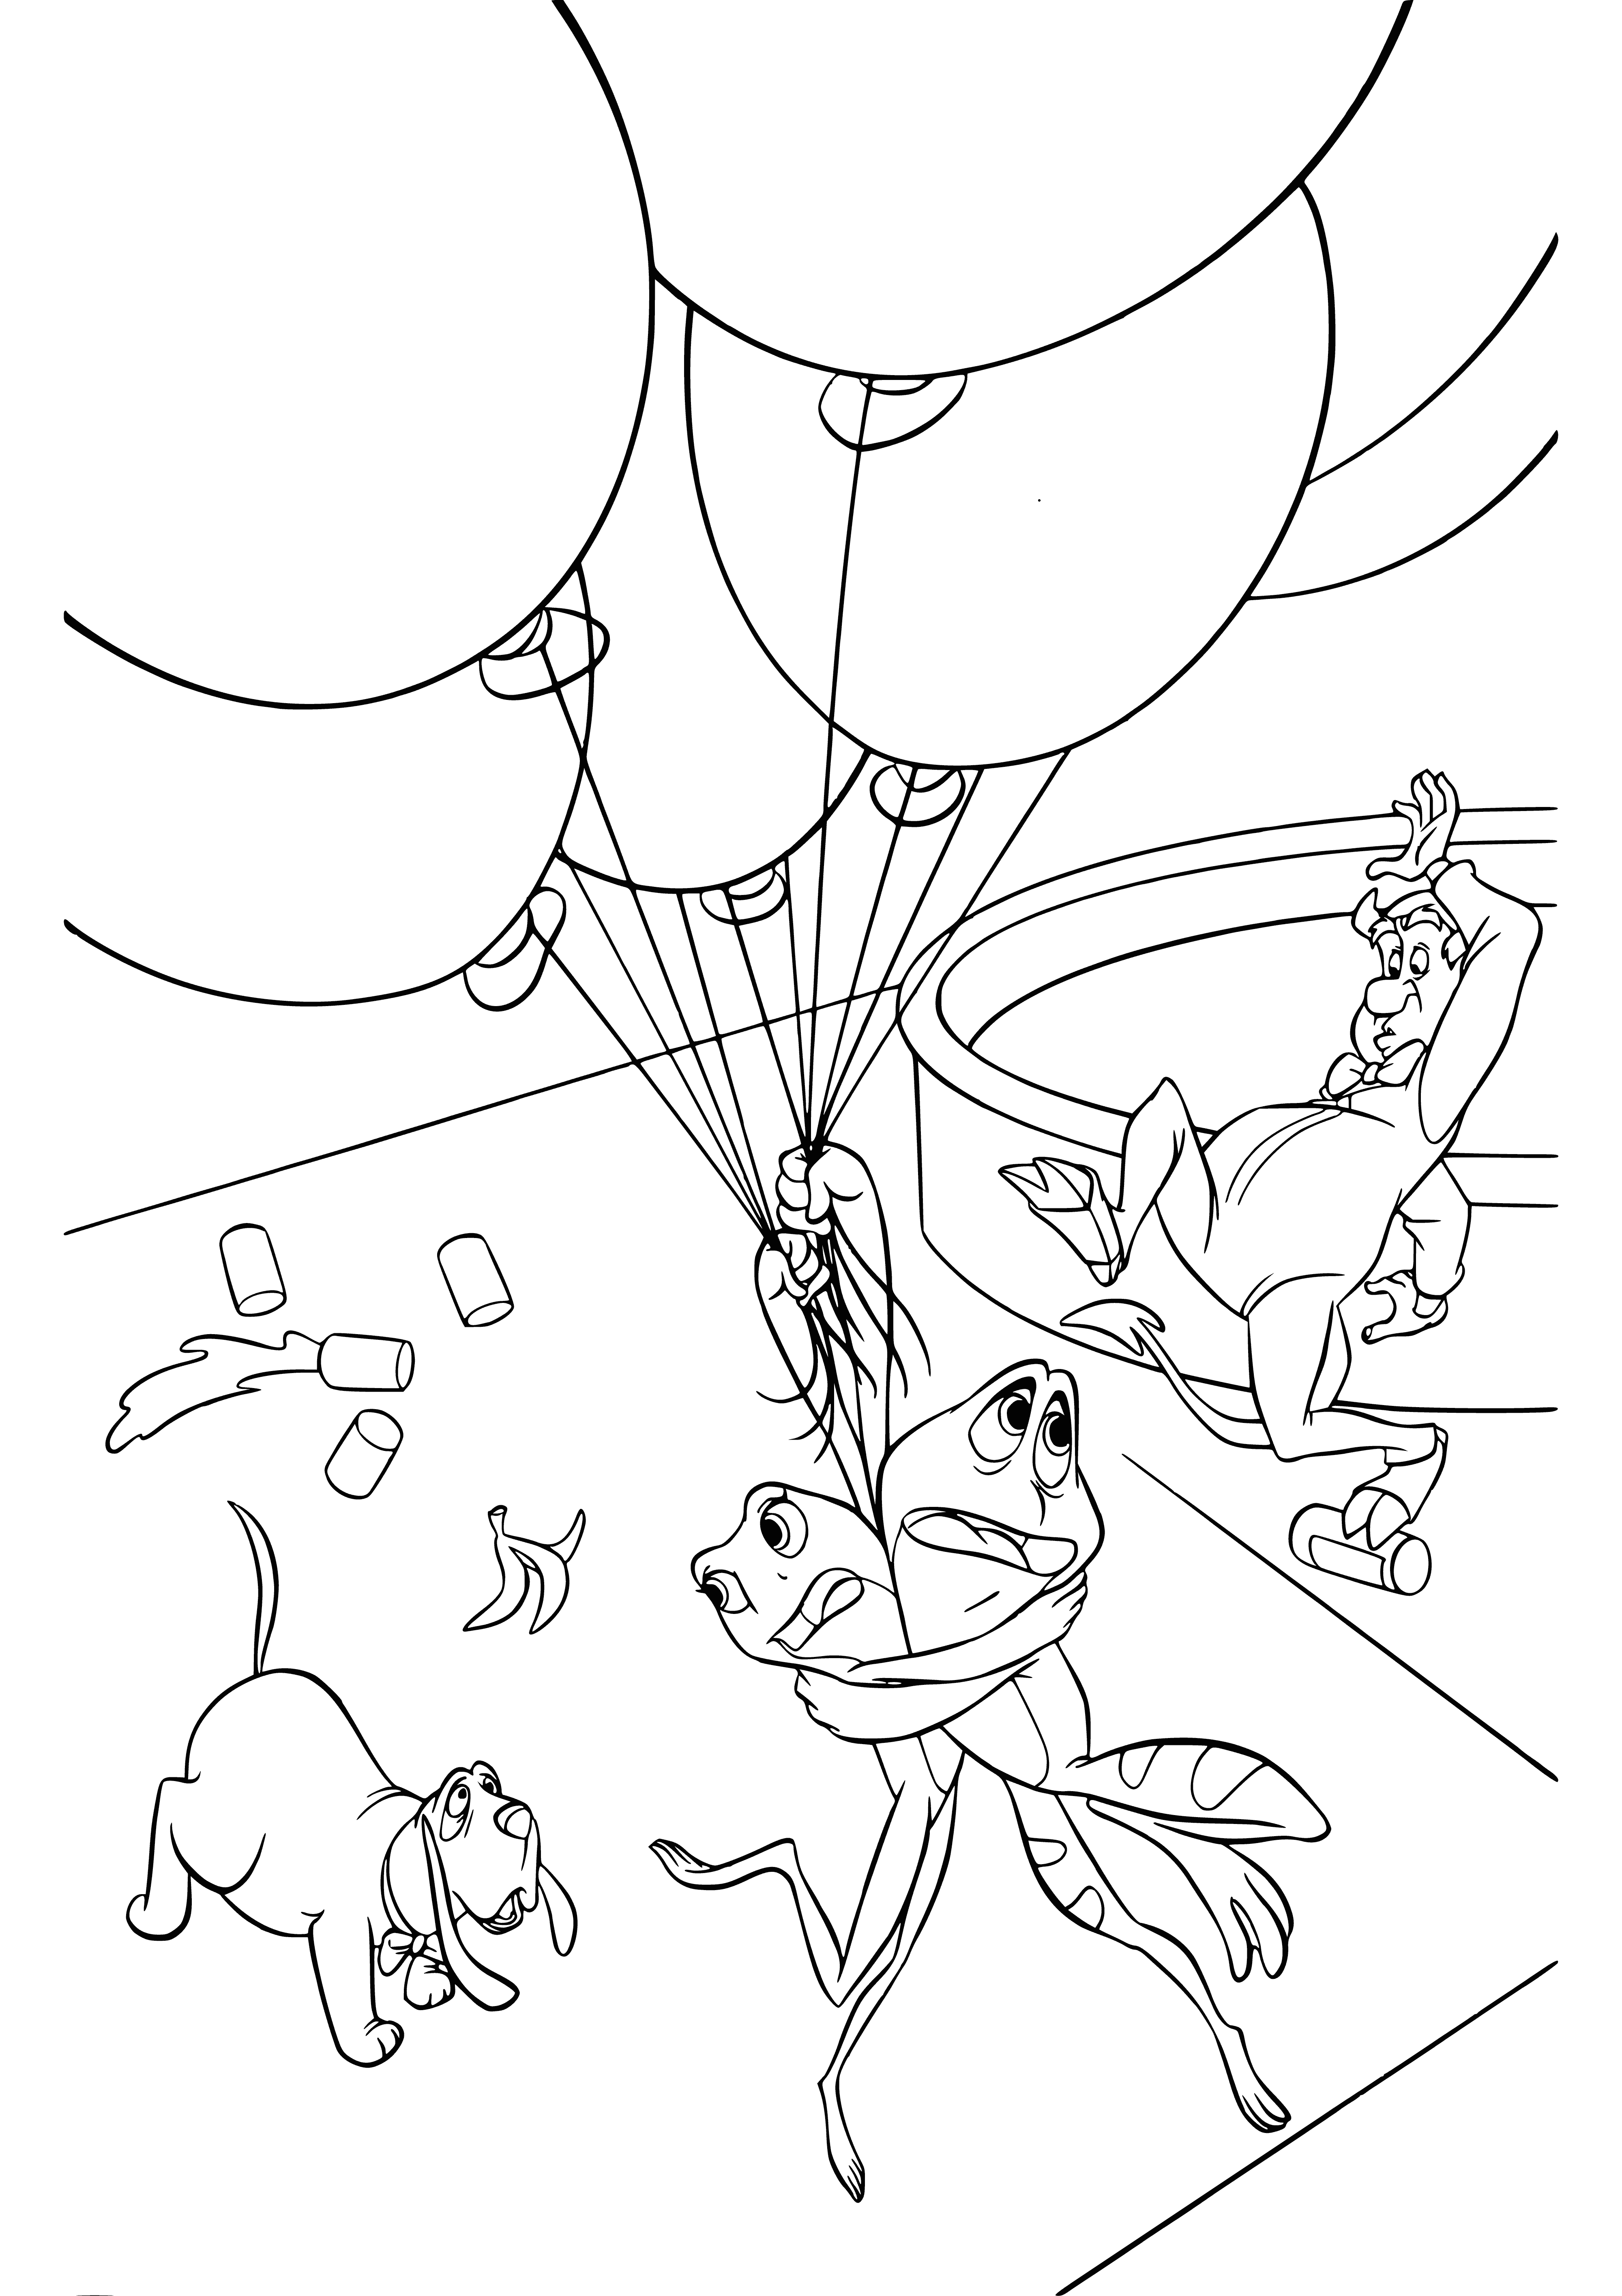 Balloon flight coloring page